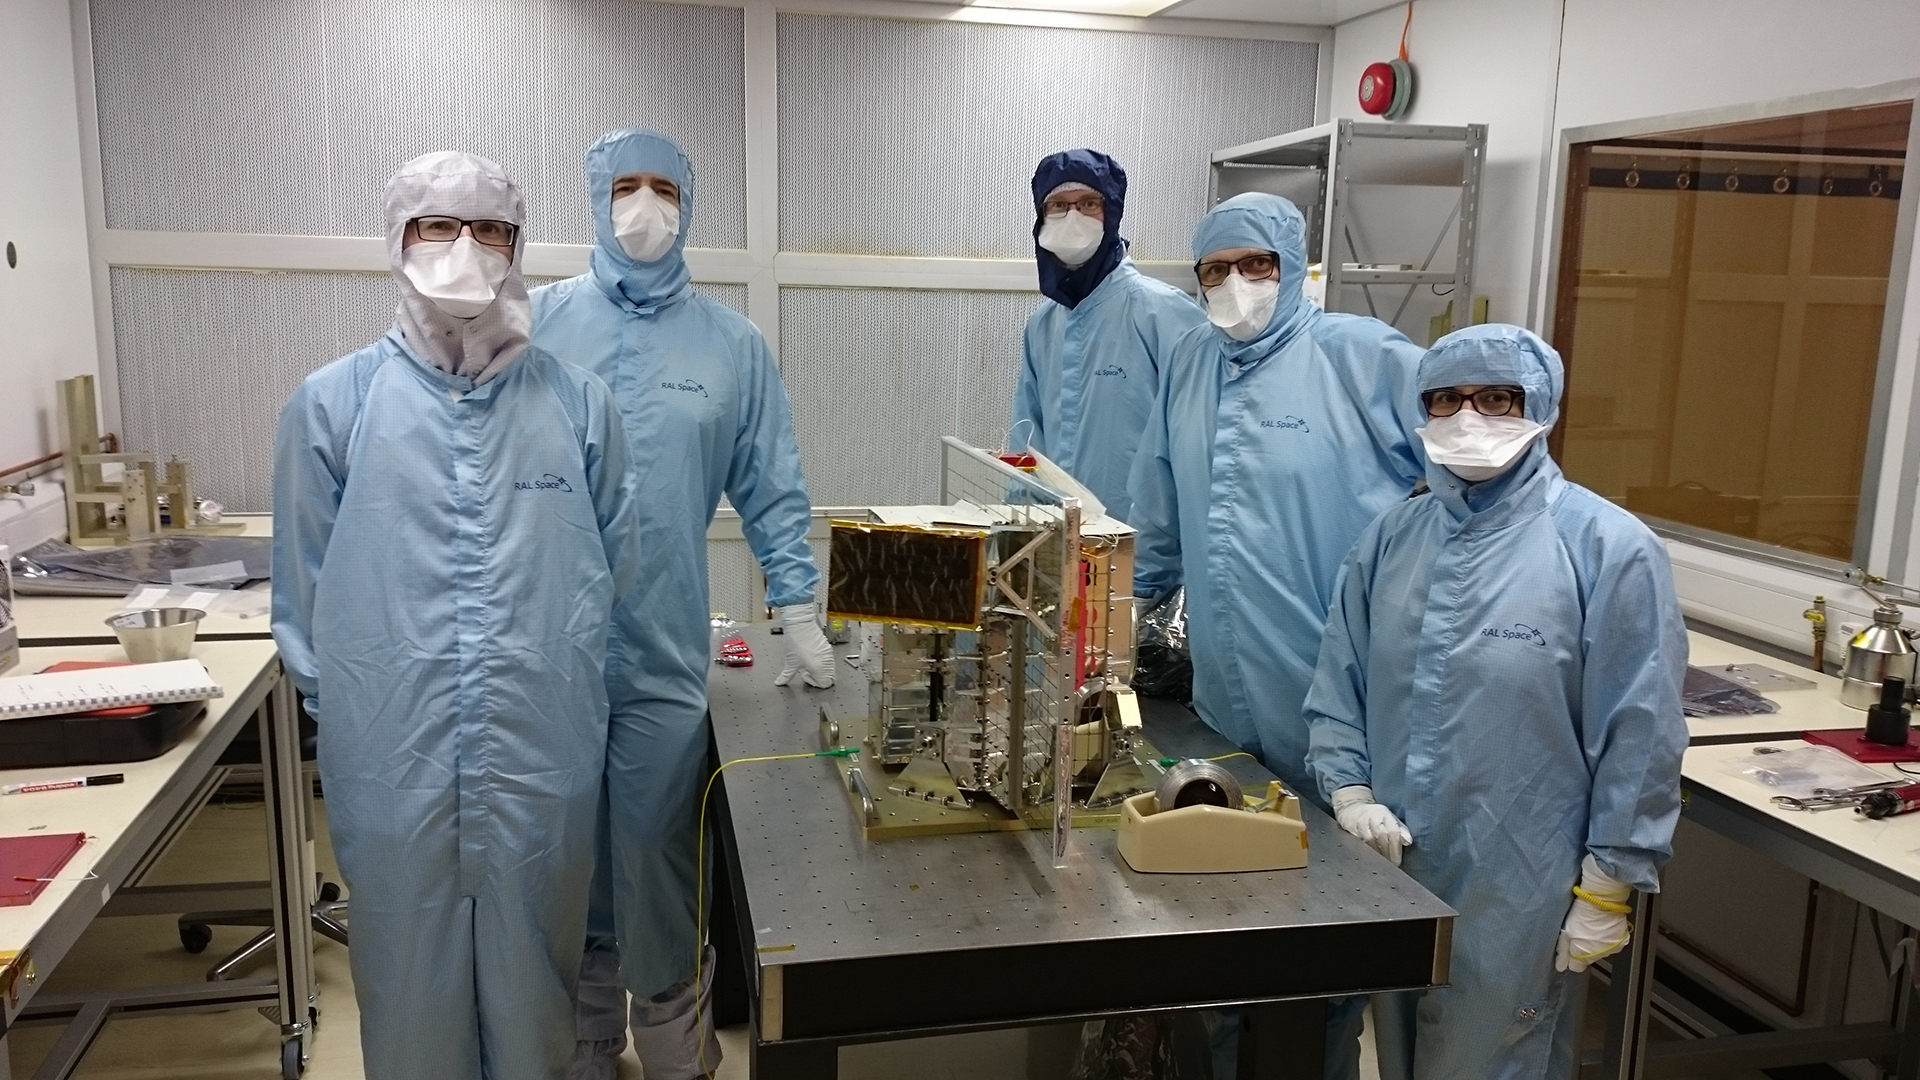 The project team stand next to BBR in a clean room.